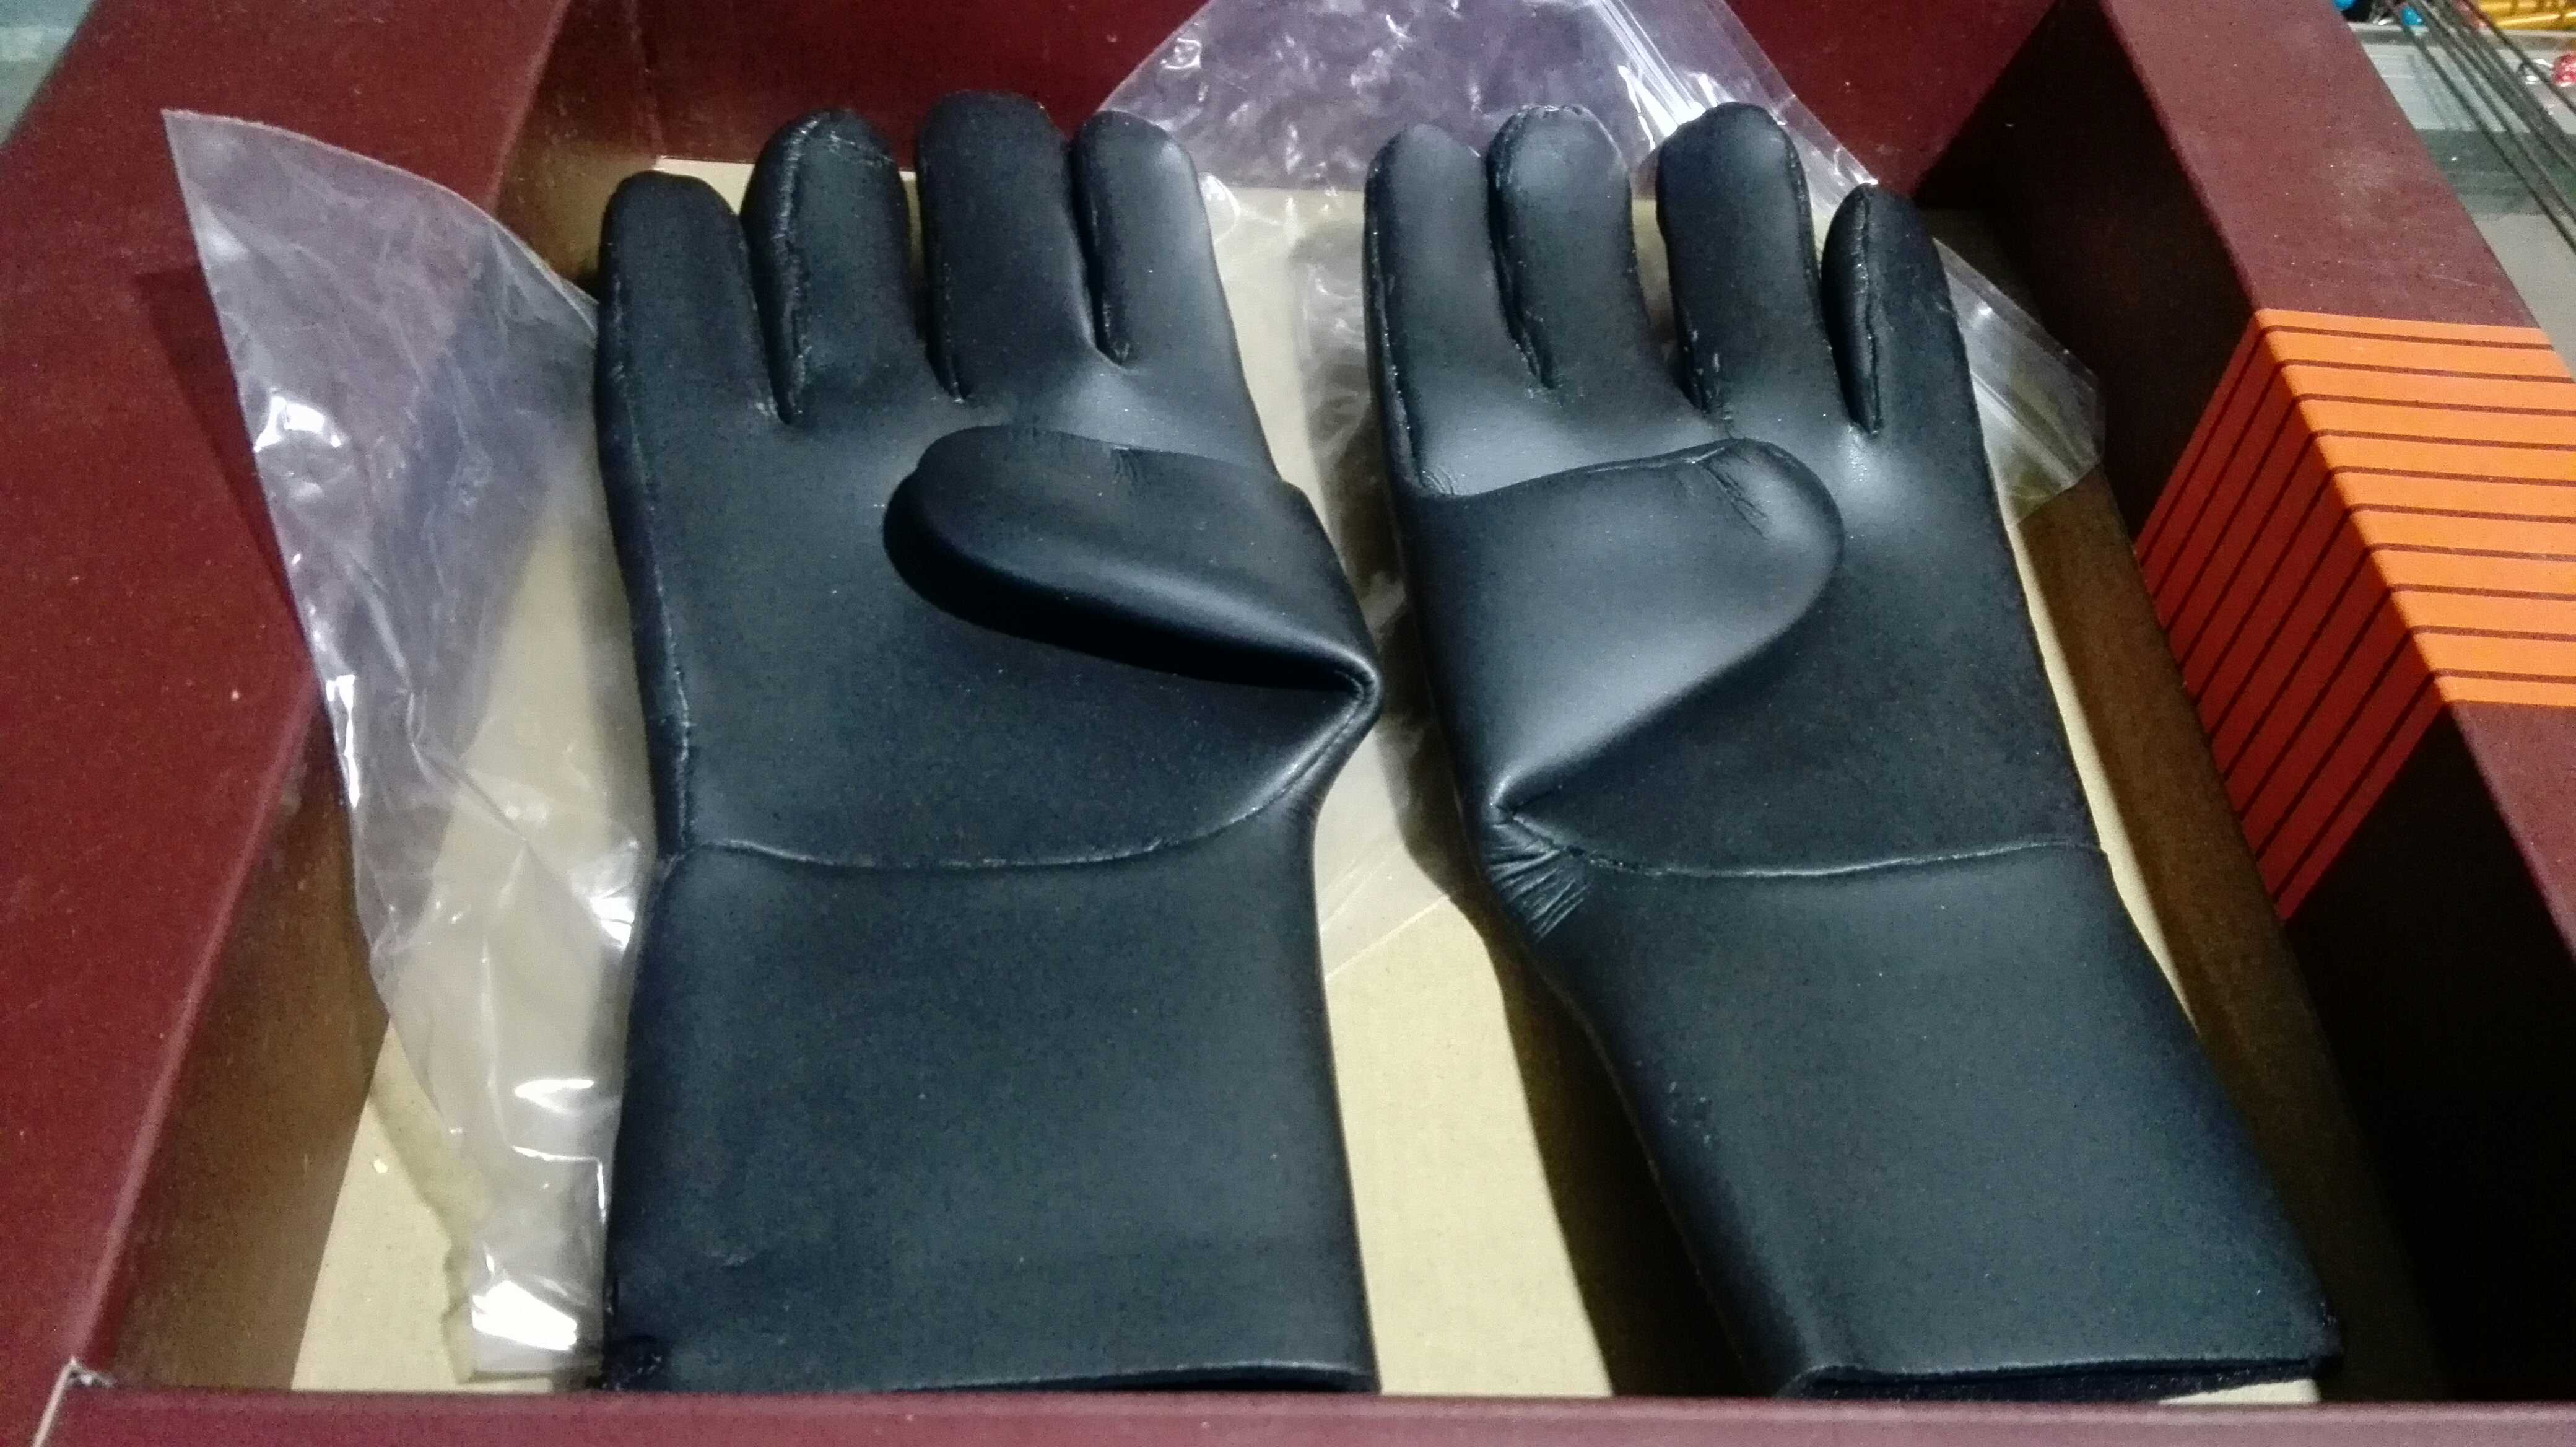 Le water dry impervious waterproof insulation gloves Underwater warm gloves